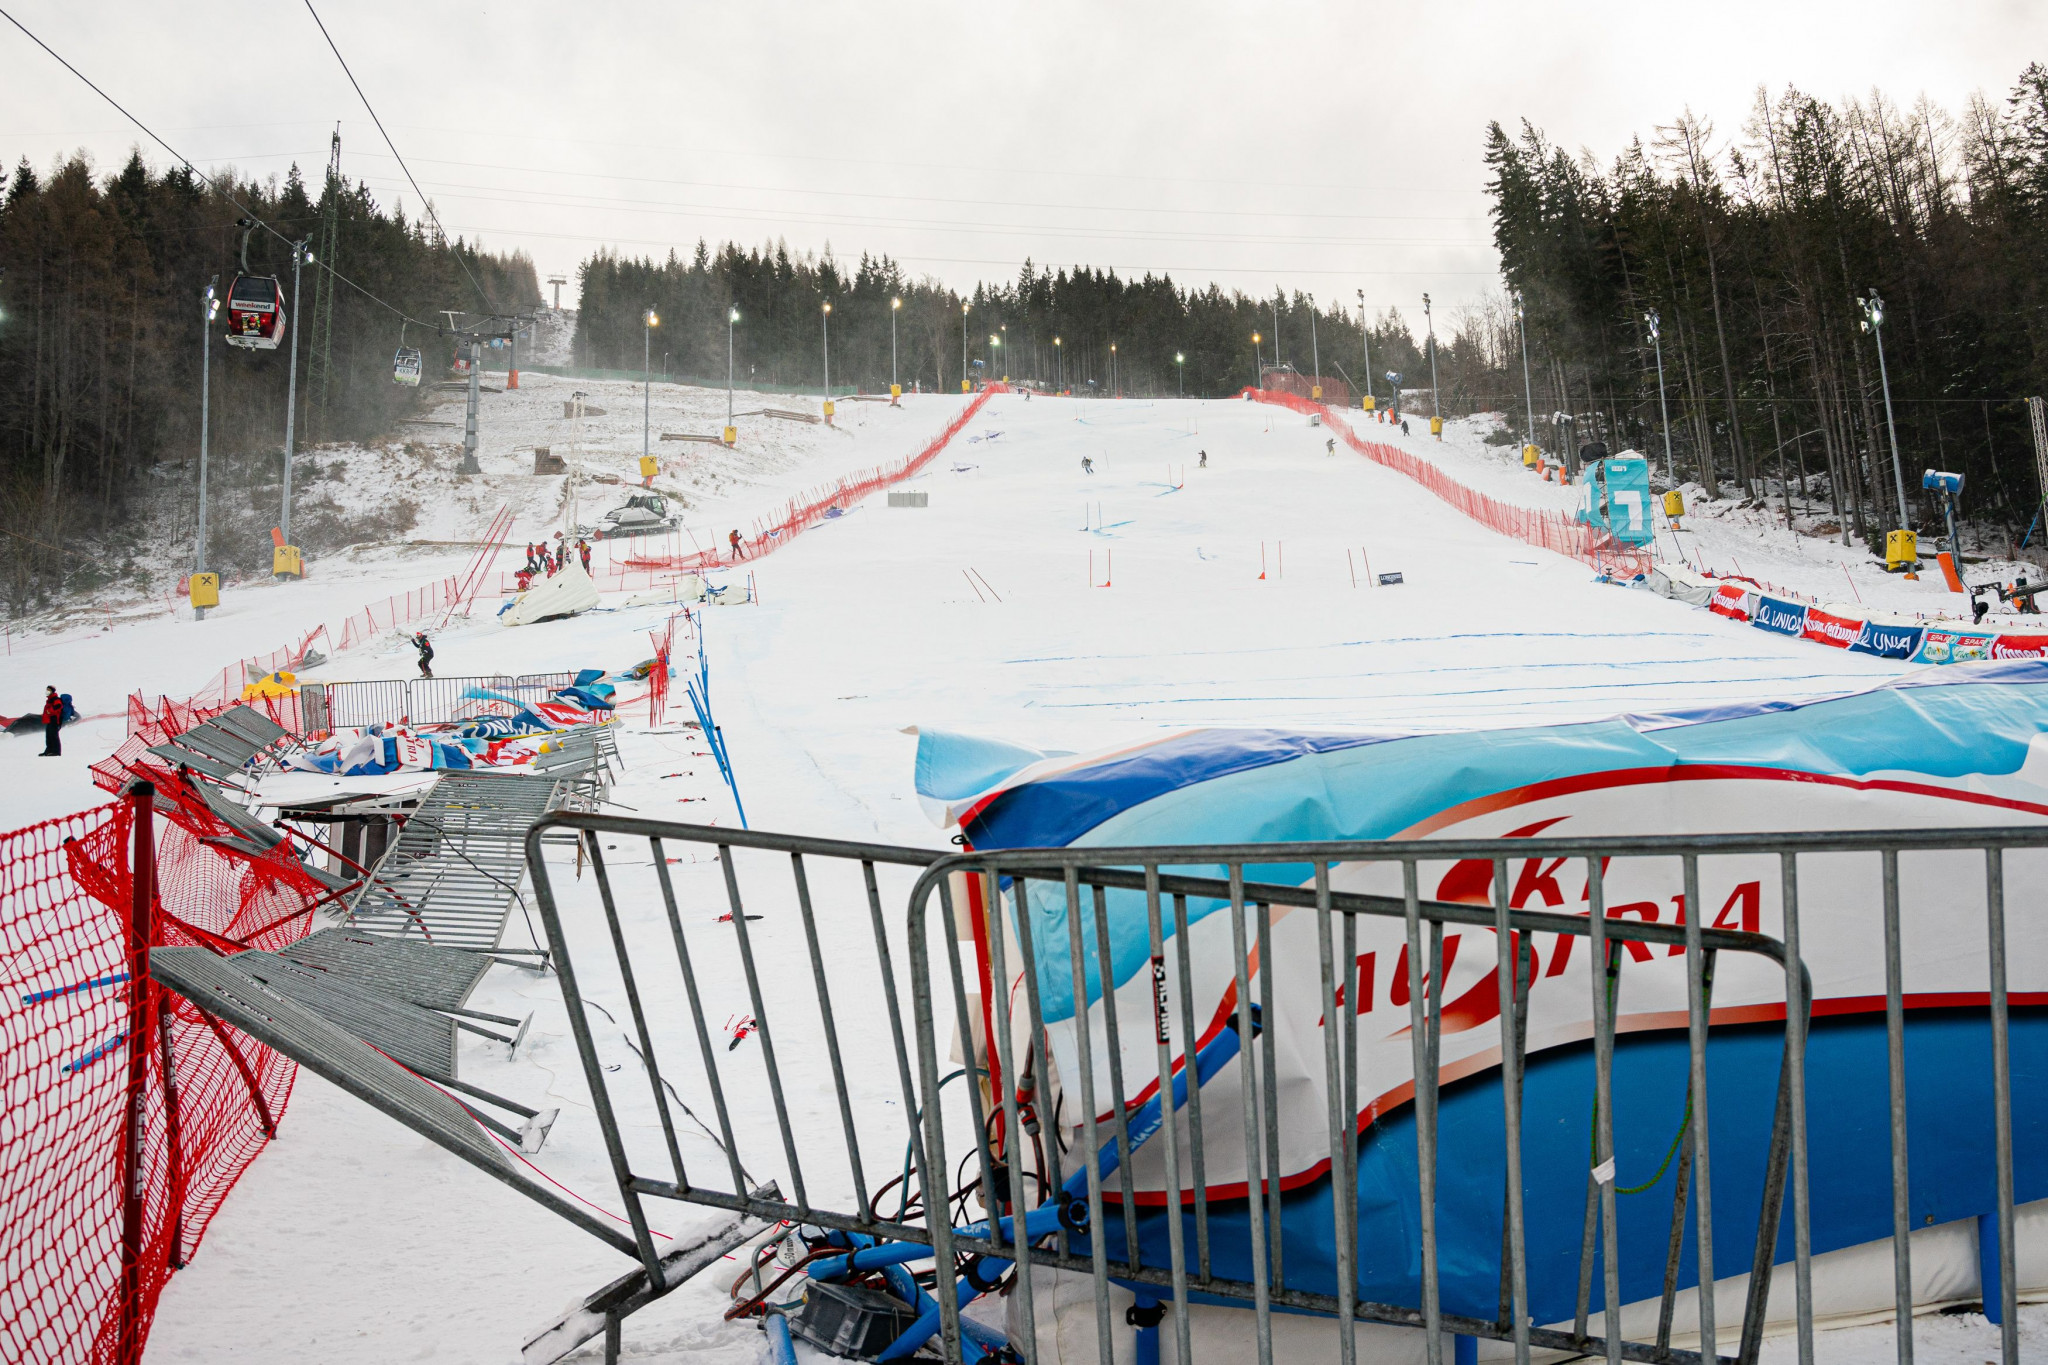 High winds cancel Semmering giant slalom with Vlhová leading after one run